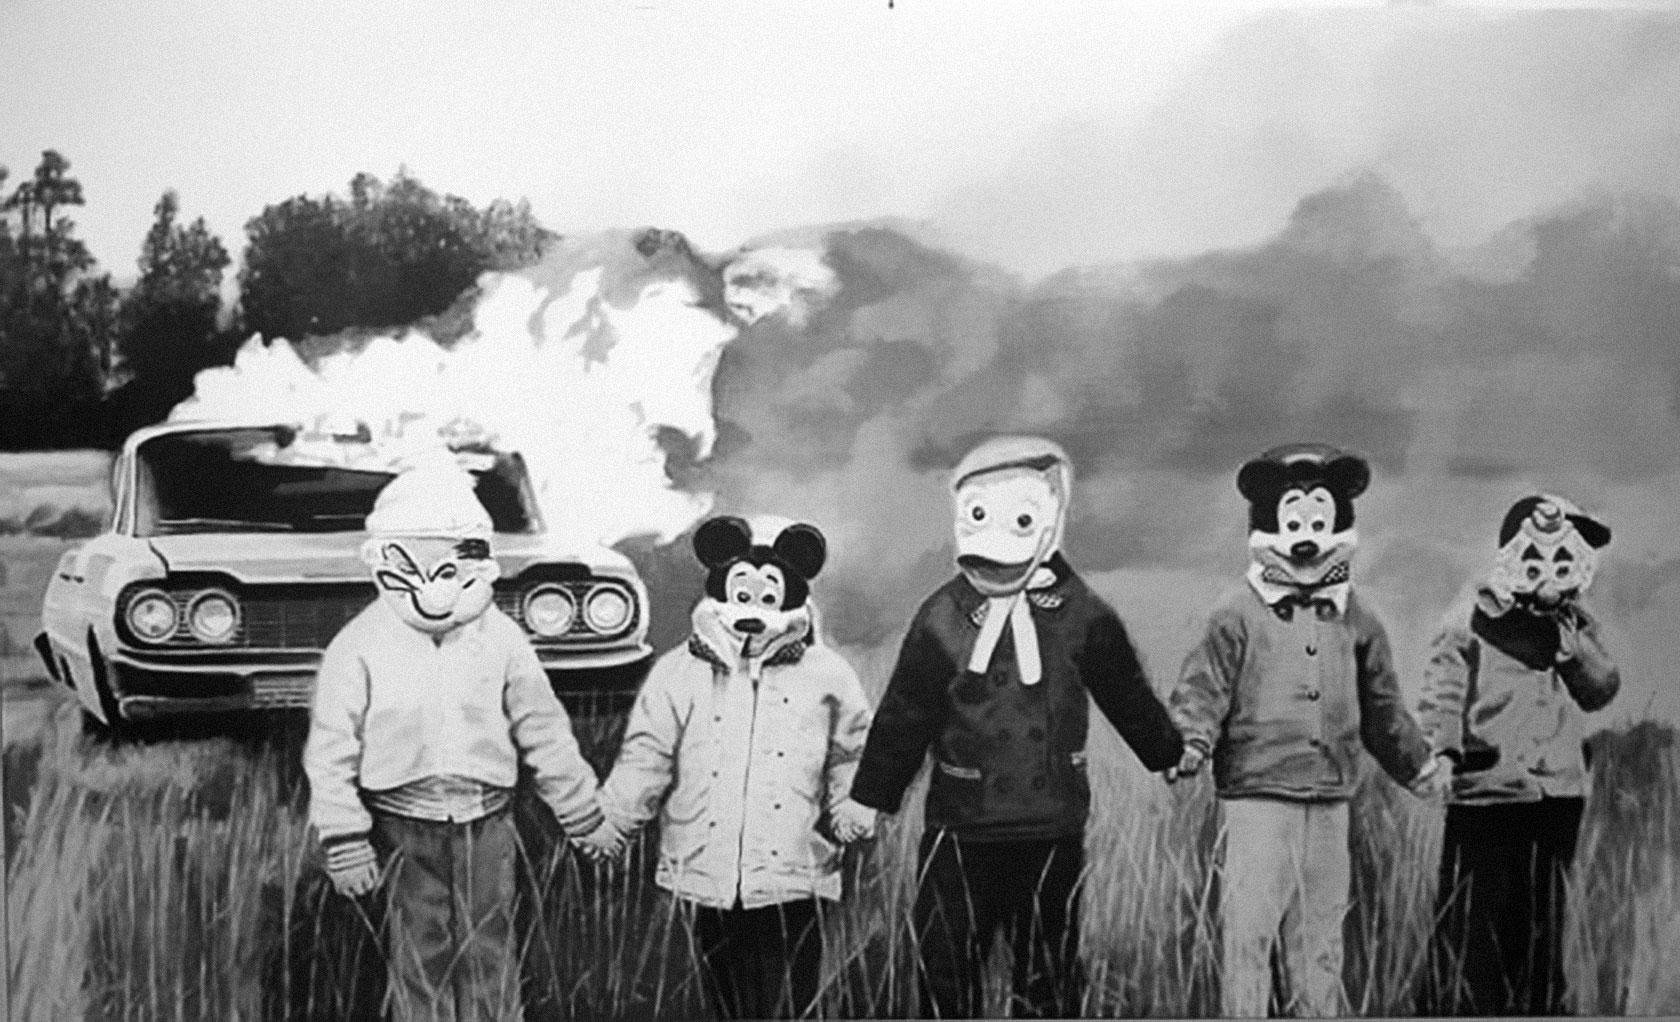 Creepy, vintage photo of masked figures ie; Popeye, Mickey Mouse